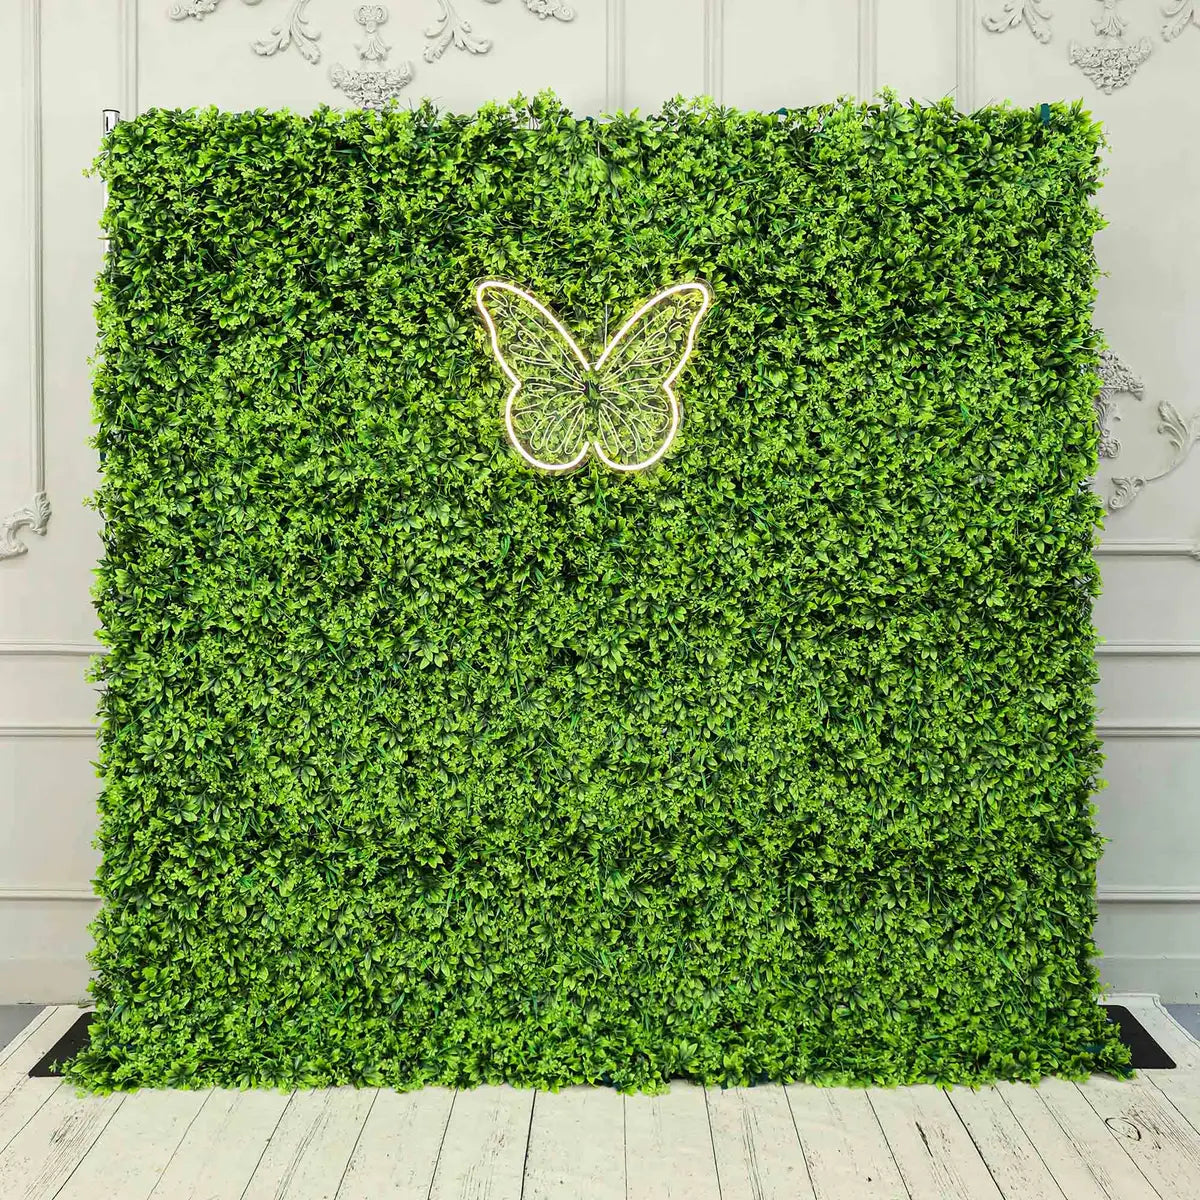 Crafted for realism, the green grass wall boasts a fabric backing and fade-resistant colors.